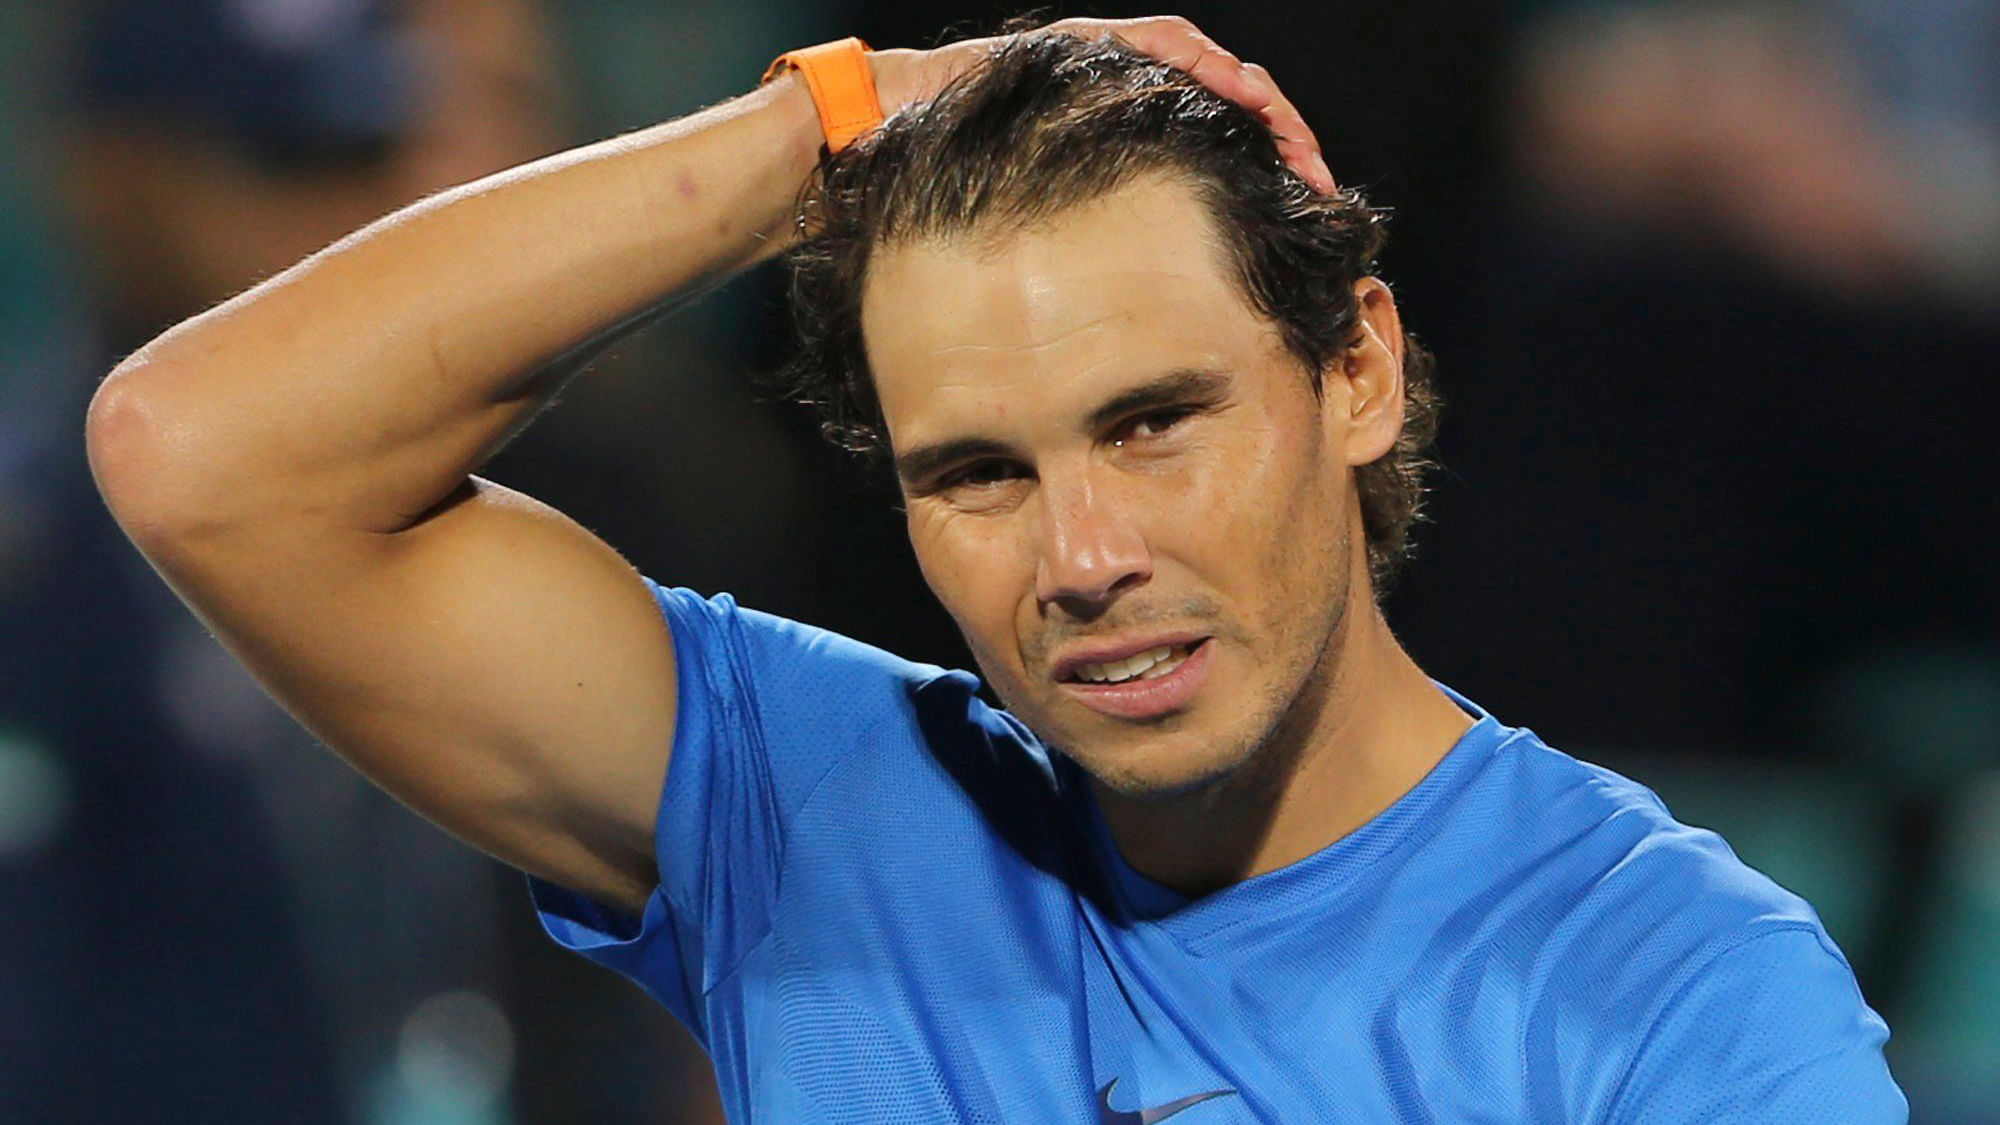 A right knee injury forced Nadal to retire from his U.S. Open semifinal, and he had ankle surgery at the start of November.